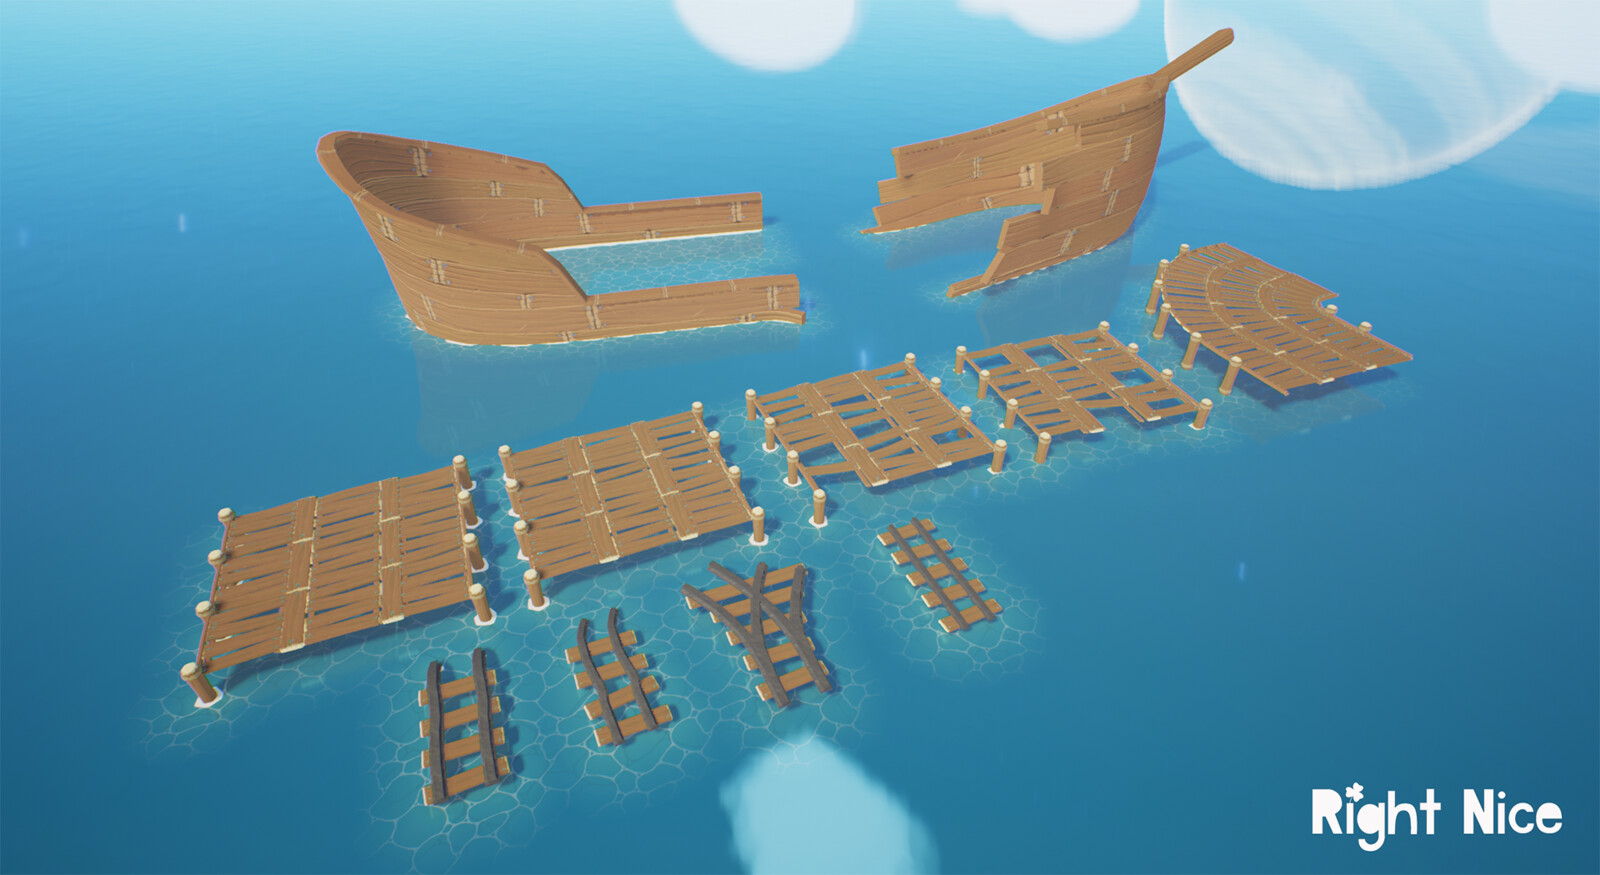 Some wooden pier variations, mine cart tracks and a shipwreck created for the new areas.